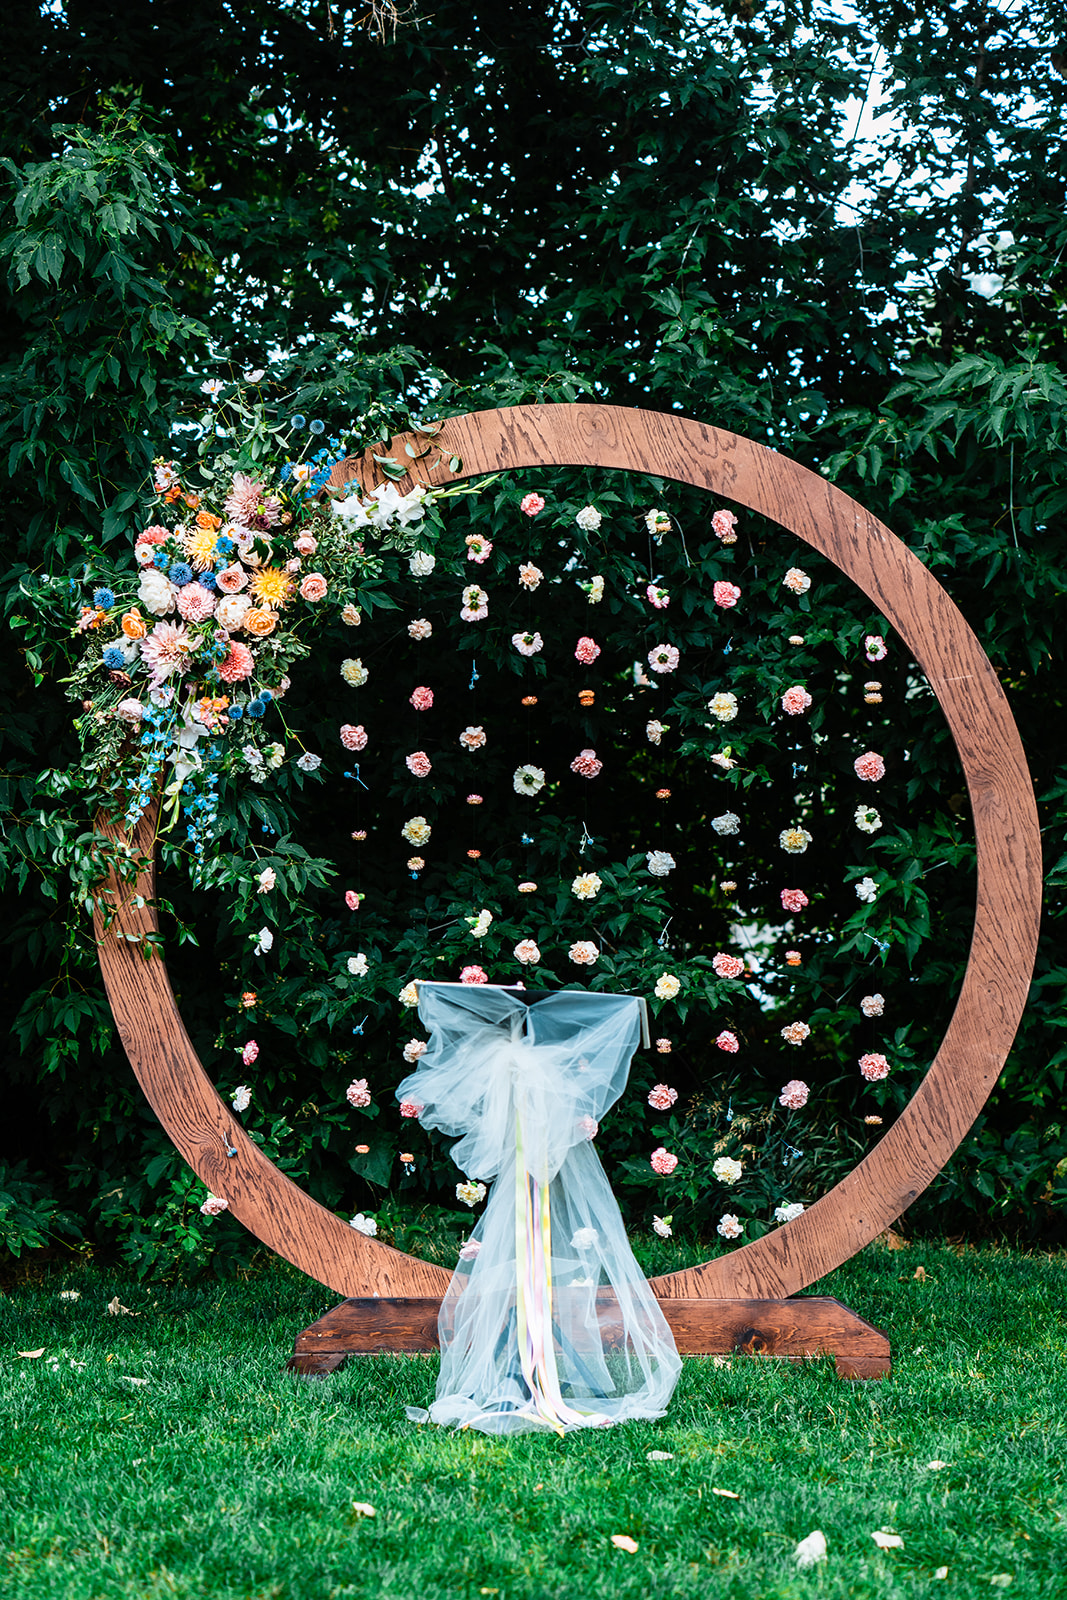 A wedding arch circle with real flowers decorate the wooden frame on a lush grassy lawn.